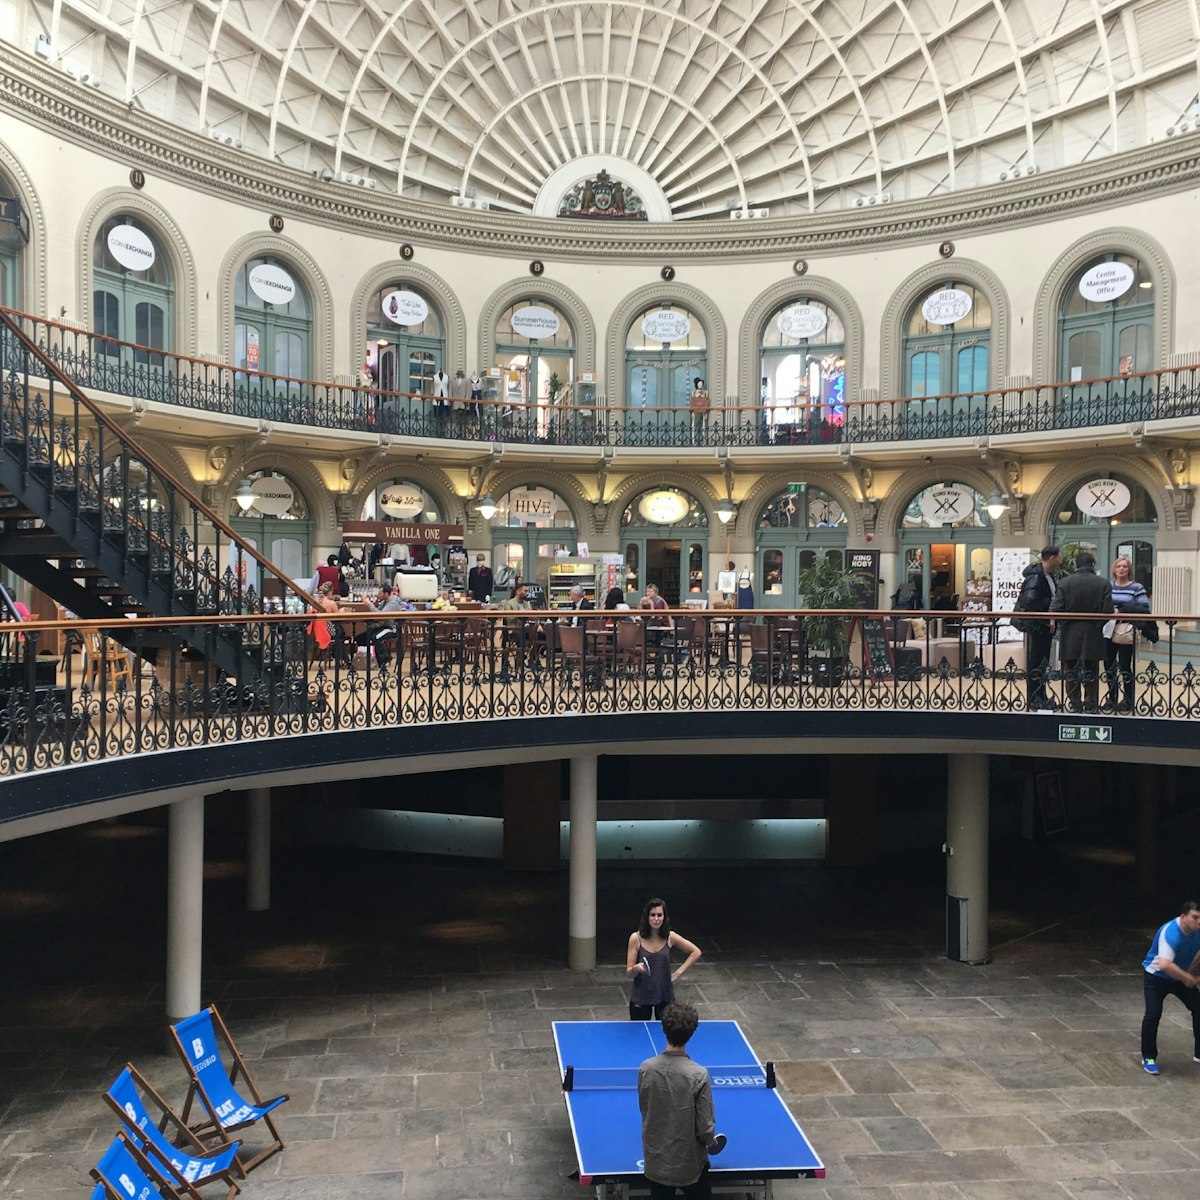 The magnificent Victorian interior of the Corn Exchange with table tennis below.